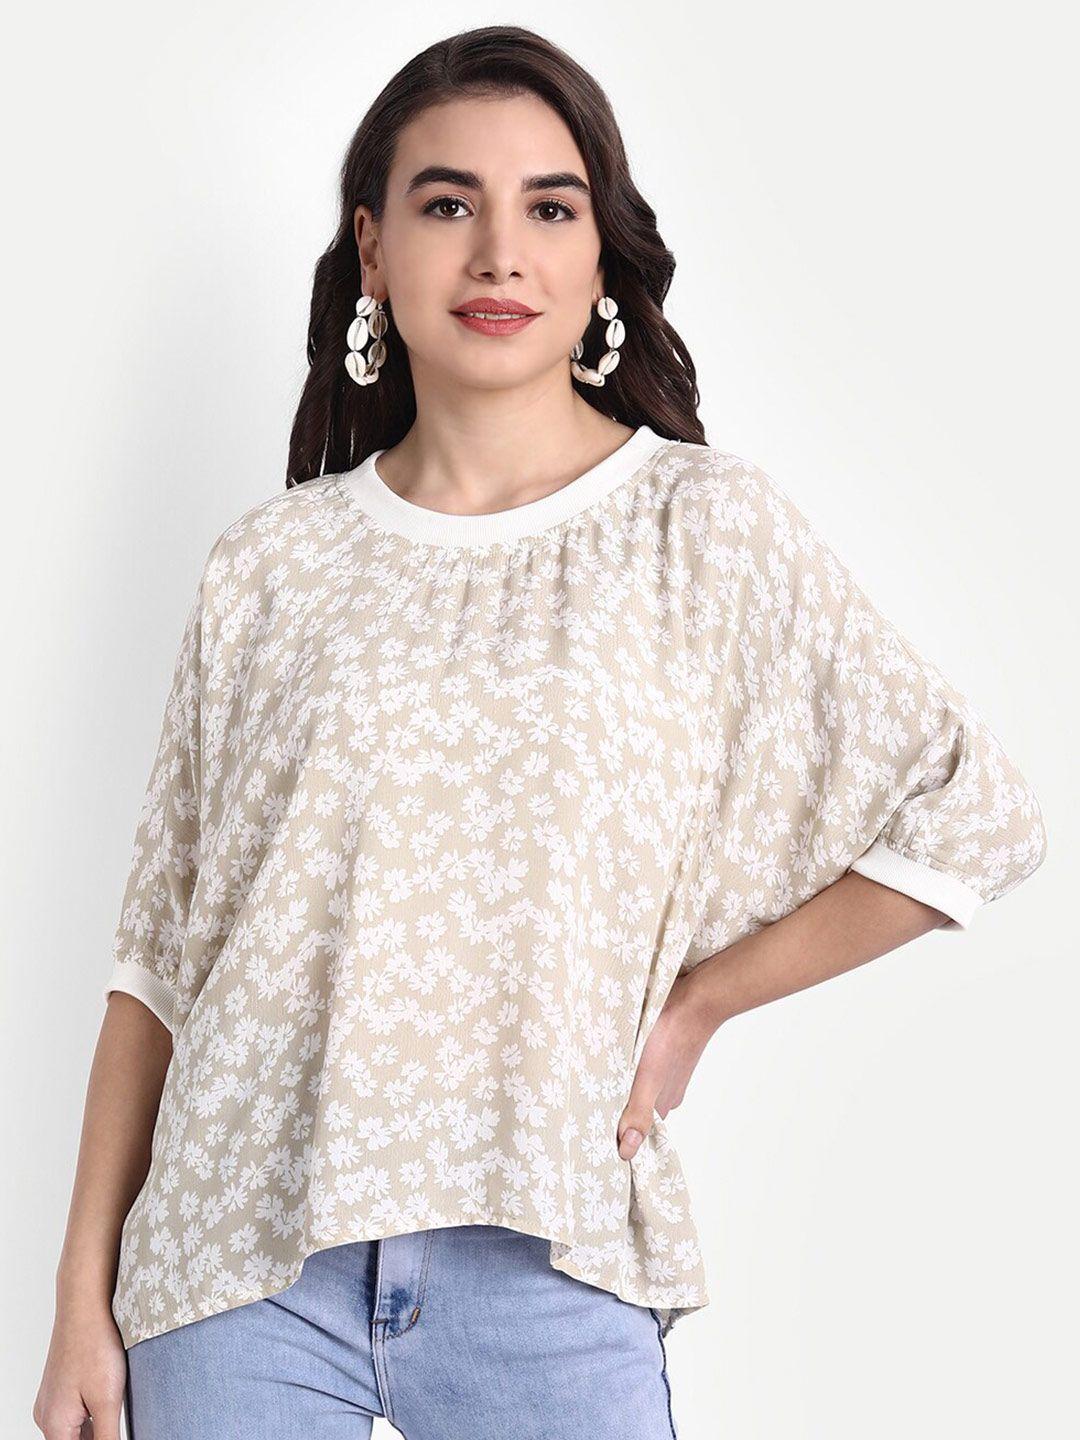 rediscover fashion beige & white floral print top